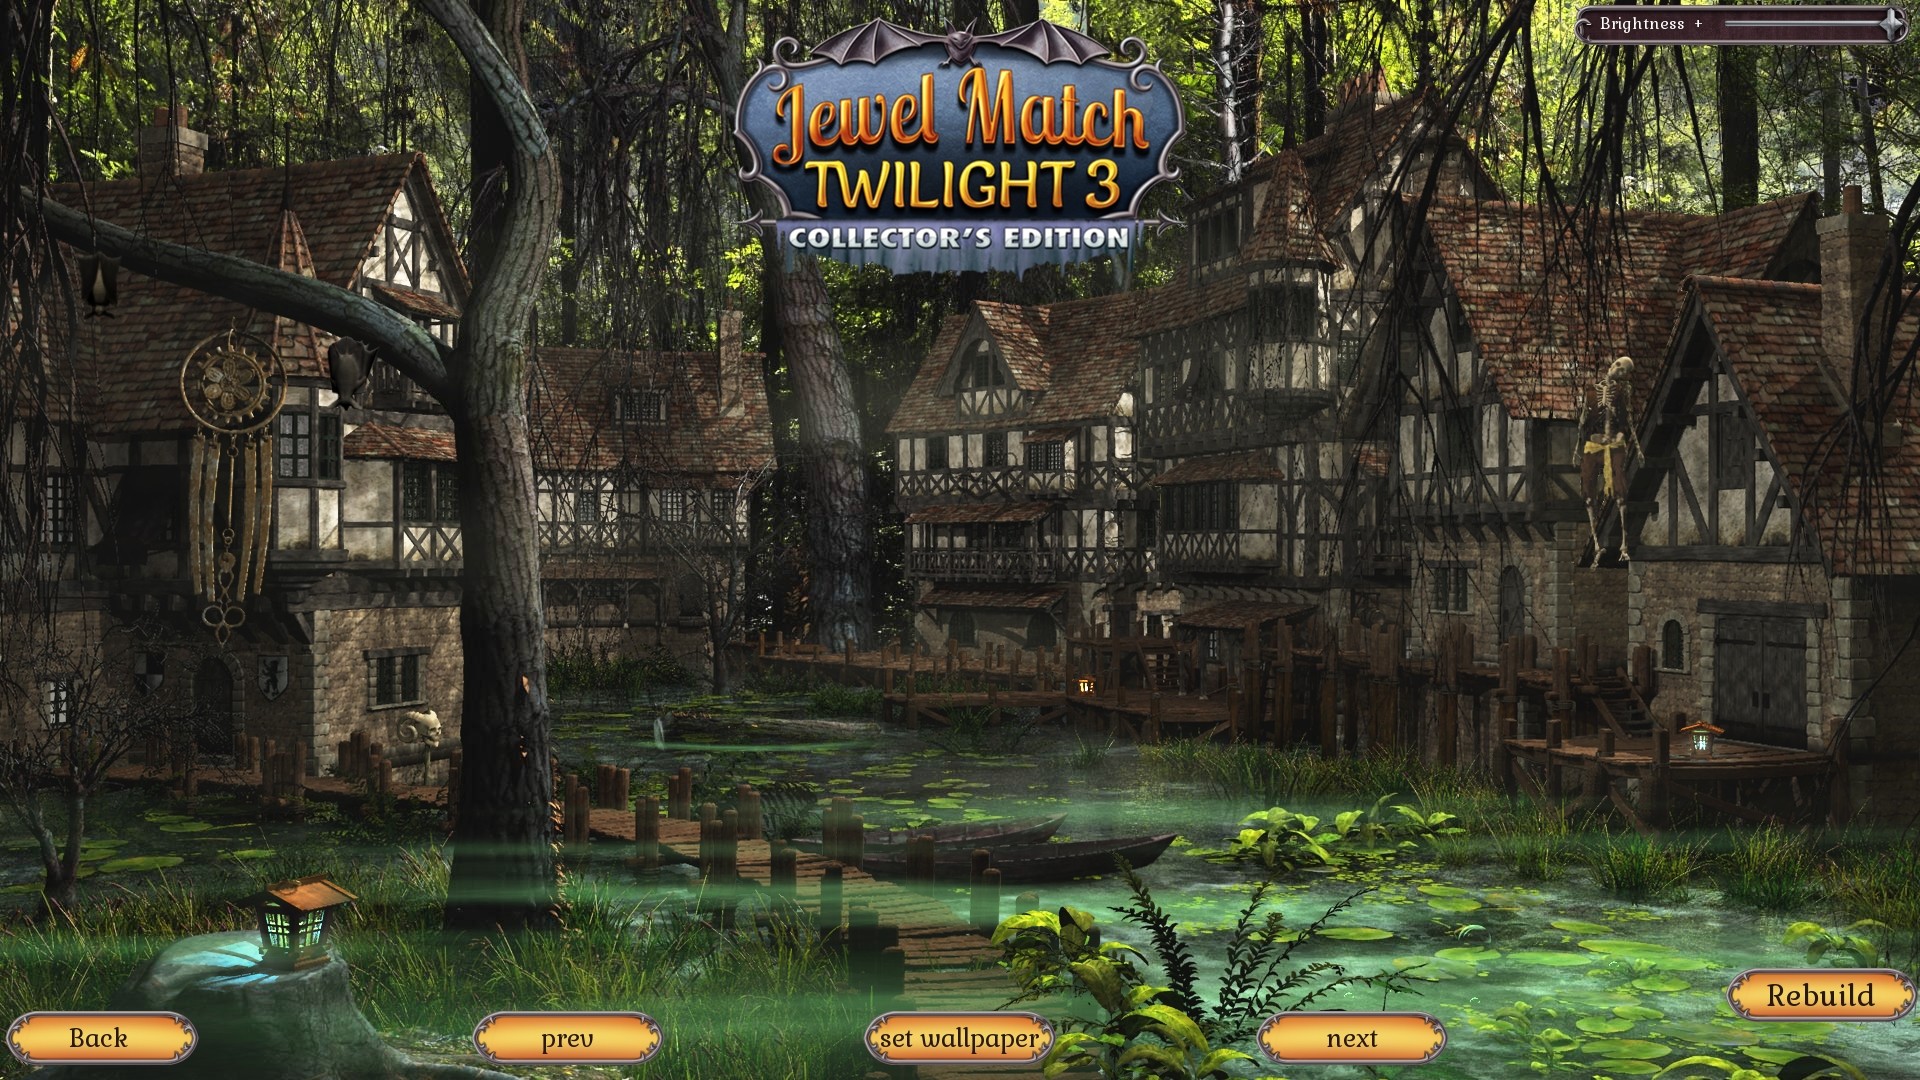 Jewel Match Twilight 3 Collector's Edition Free Download